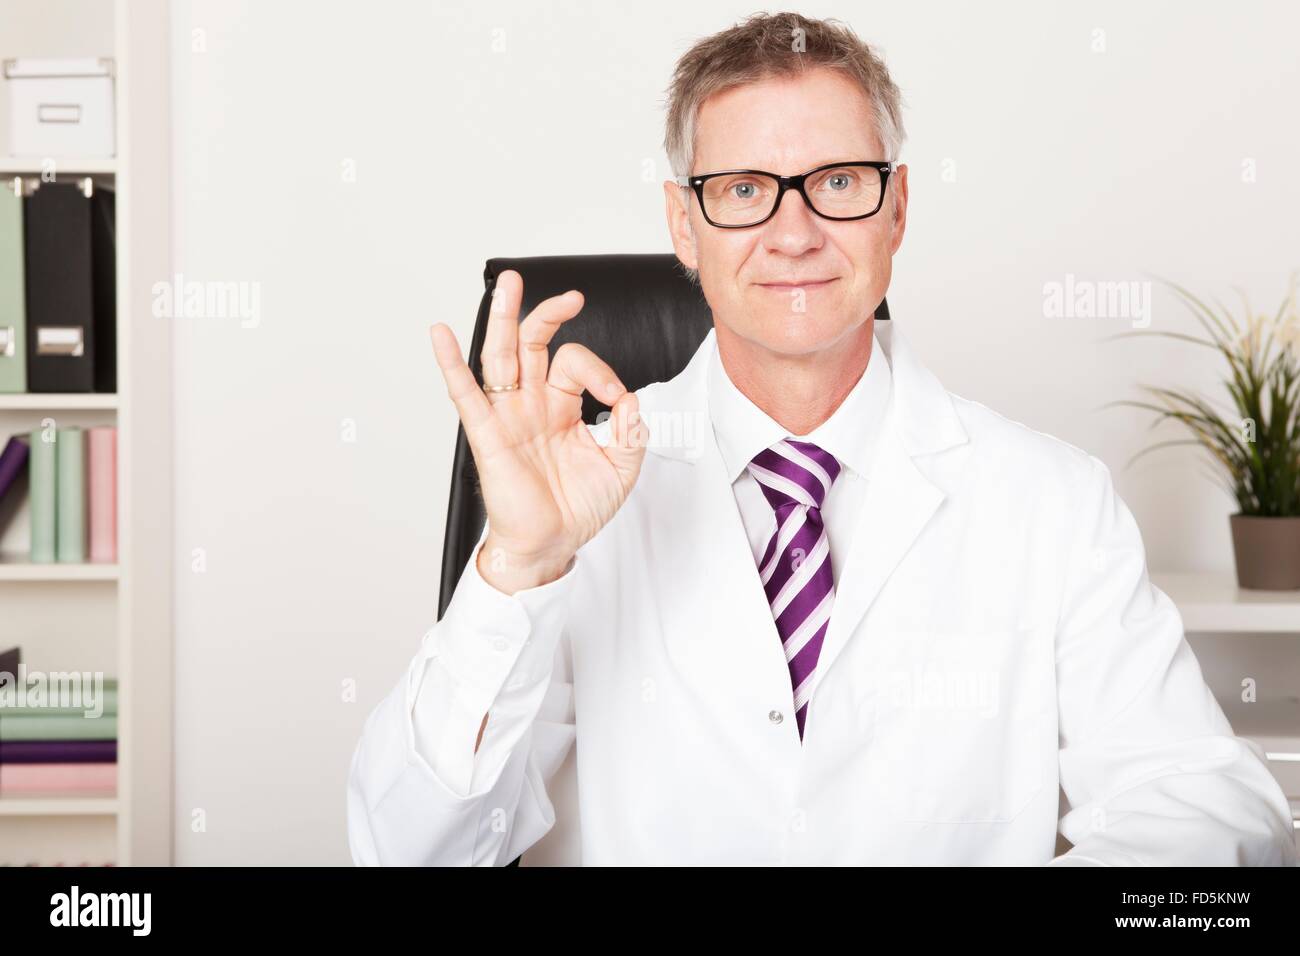 Smiling Doctor Showing Okay Hand Sign Emphasizing Positive Updates Stock Photo